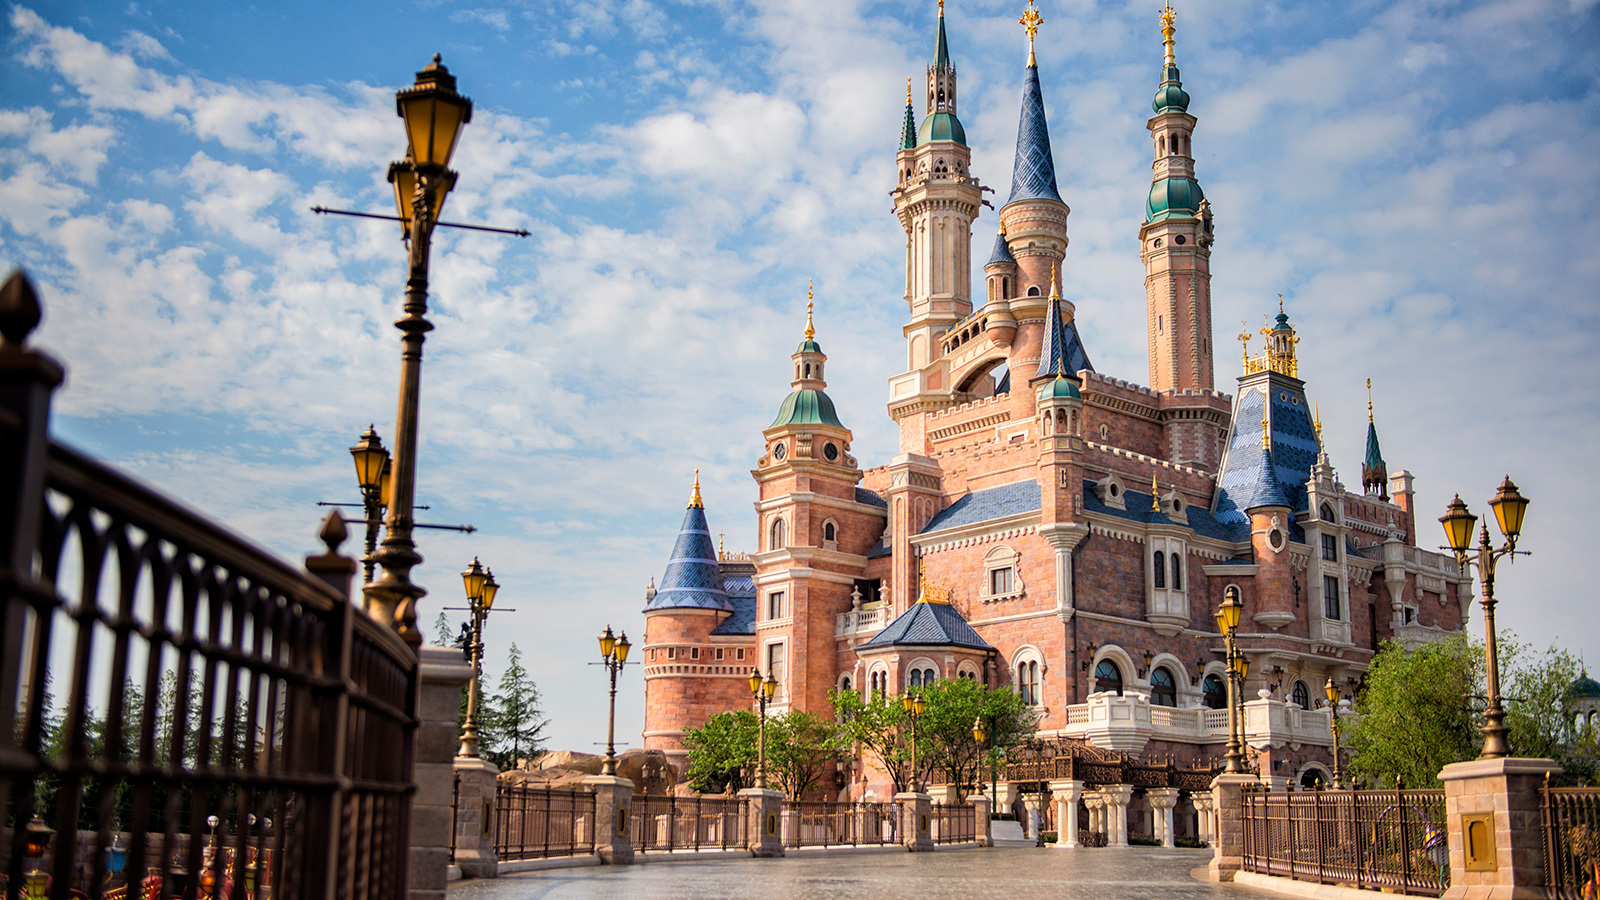 Shanghai Disney Resort Honored with China’s Highest Construction Industry Award